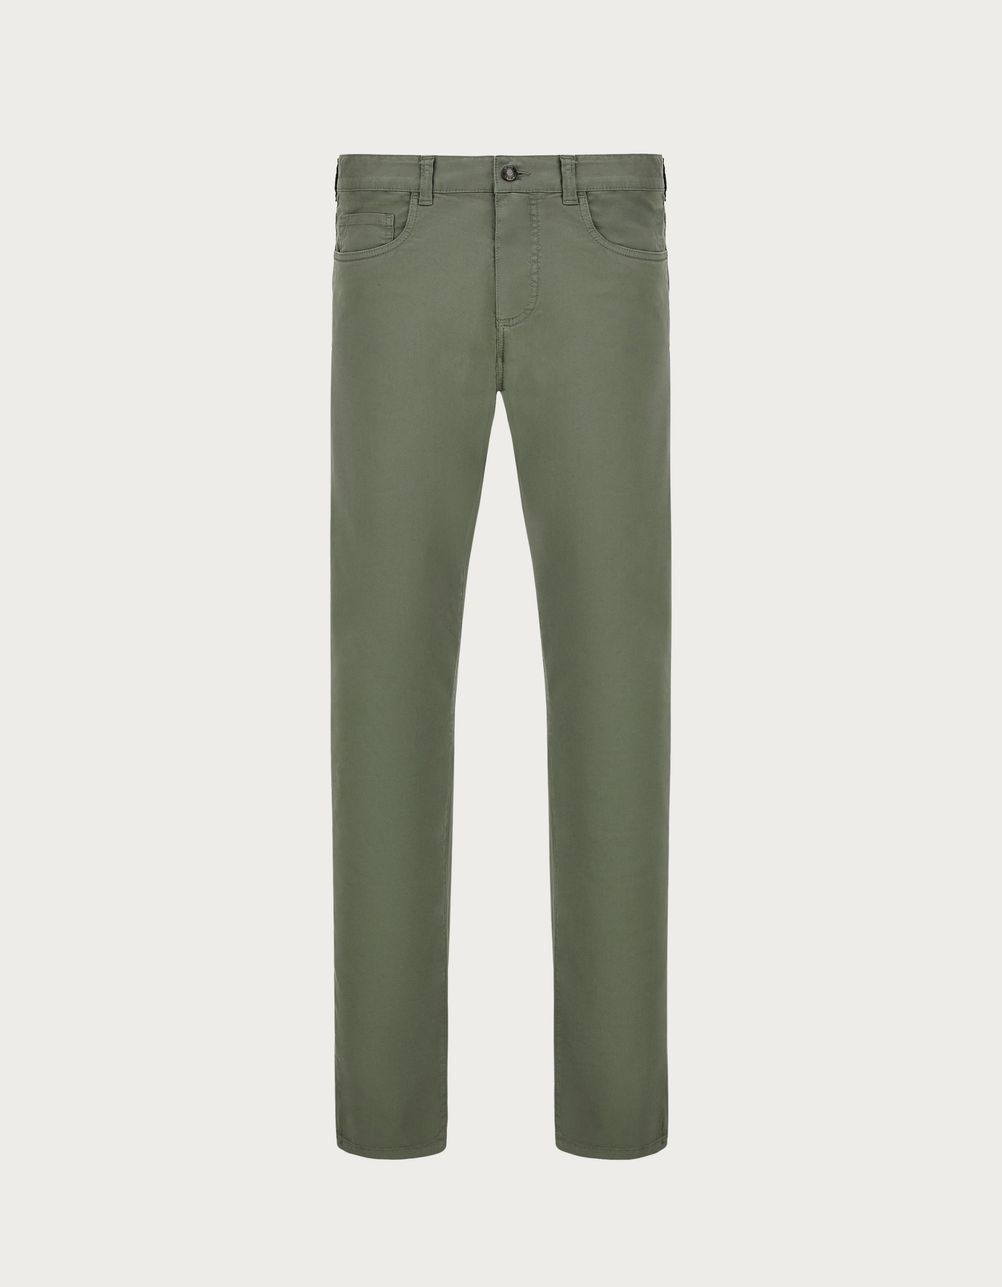 Five-pocket regular-fit pants in sage green garment-dyed cotton microtwill